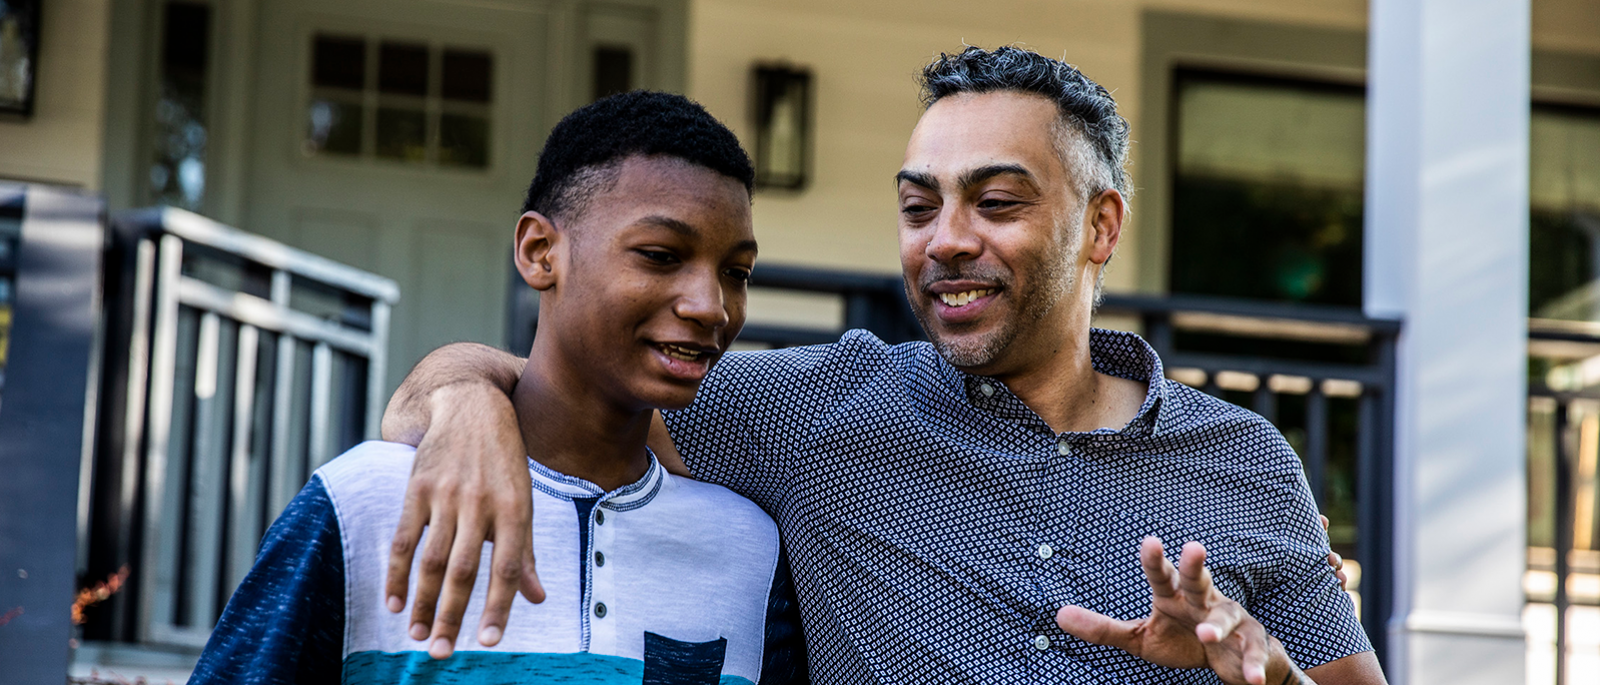 Man talking and smiling with teenage boy